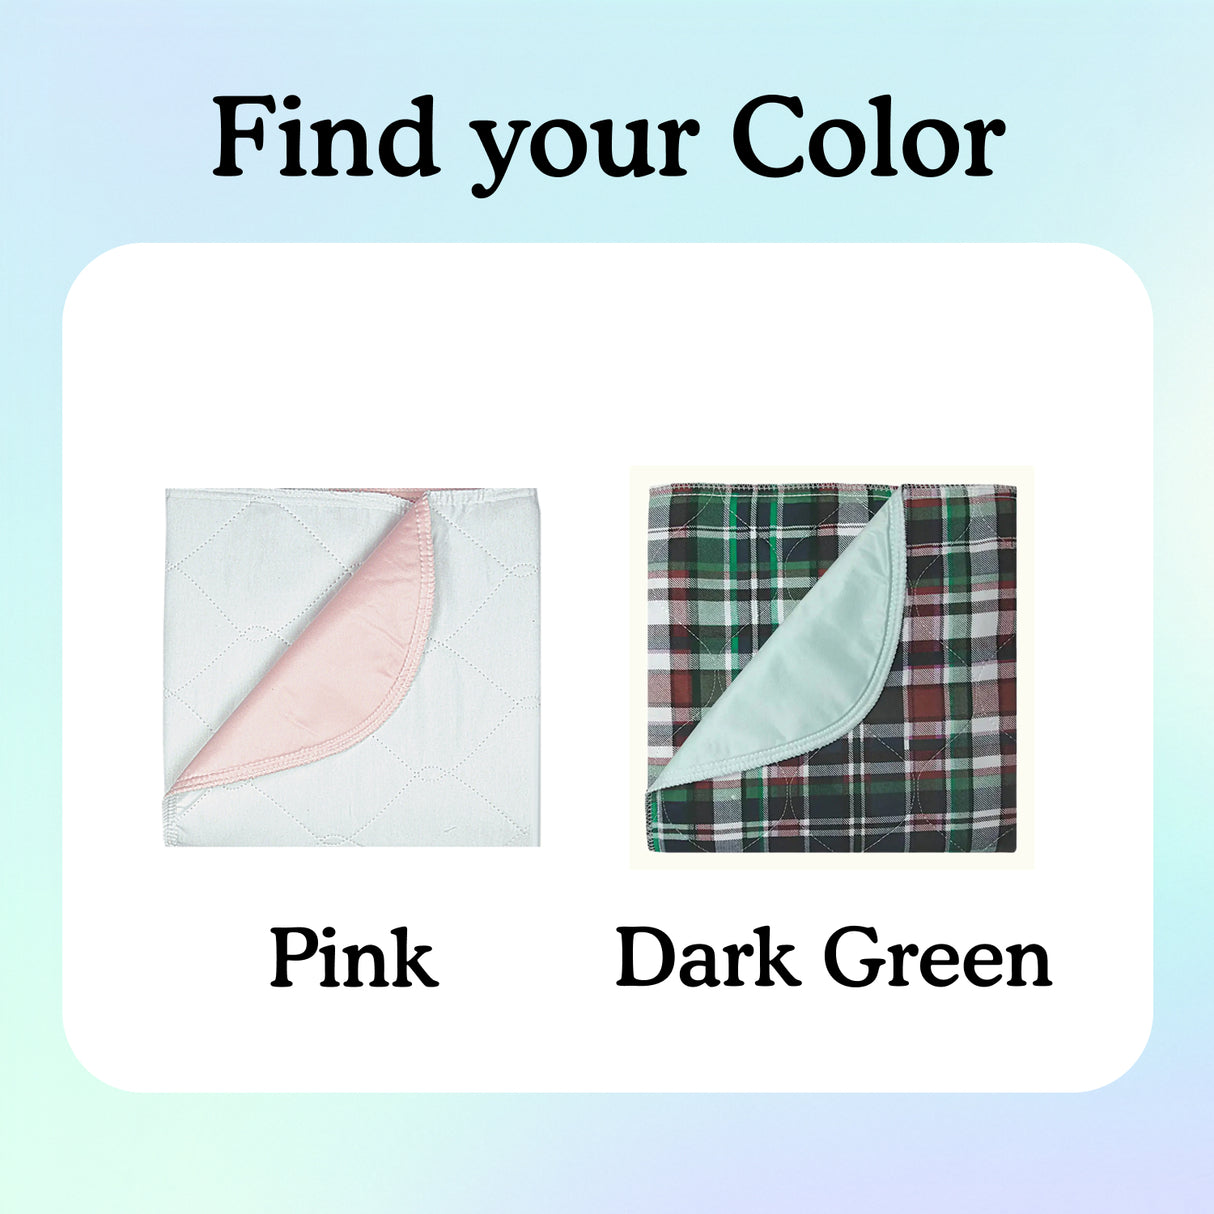 Find your color: pink or dark green.